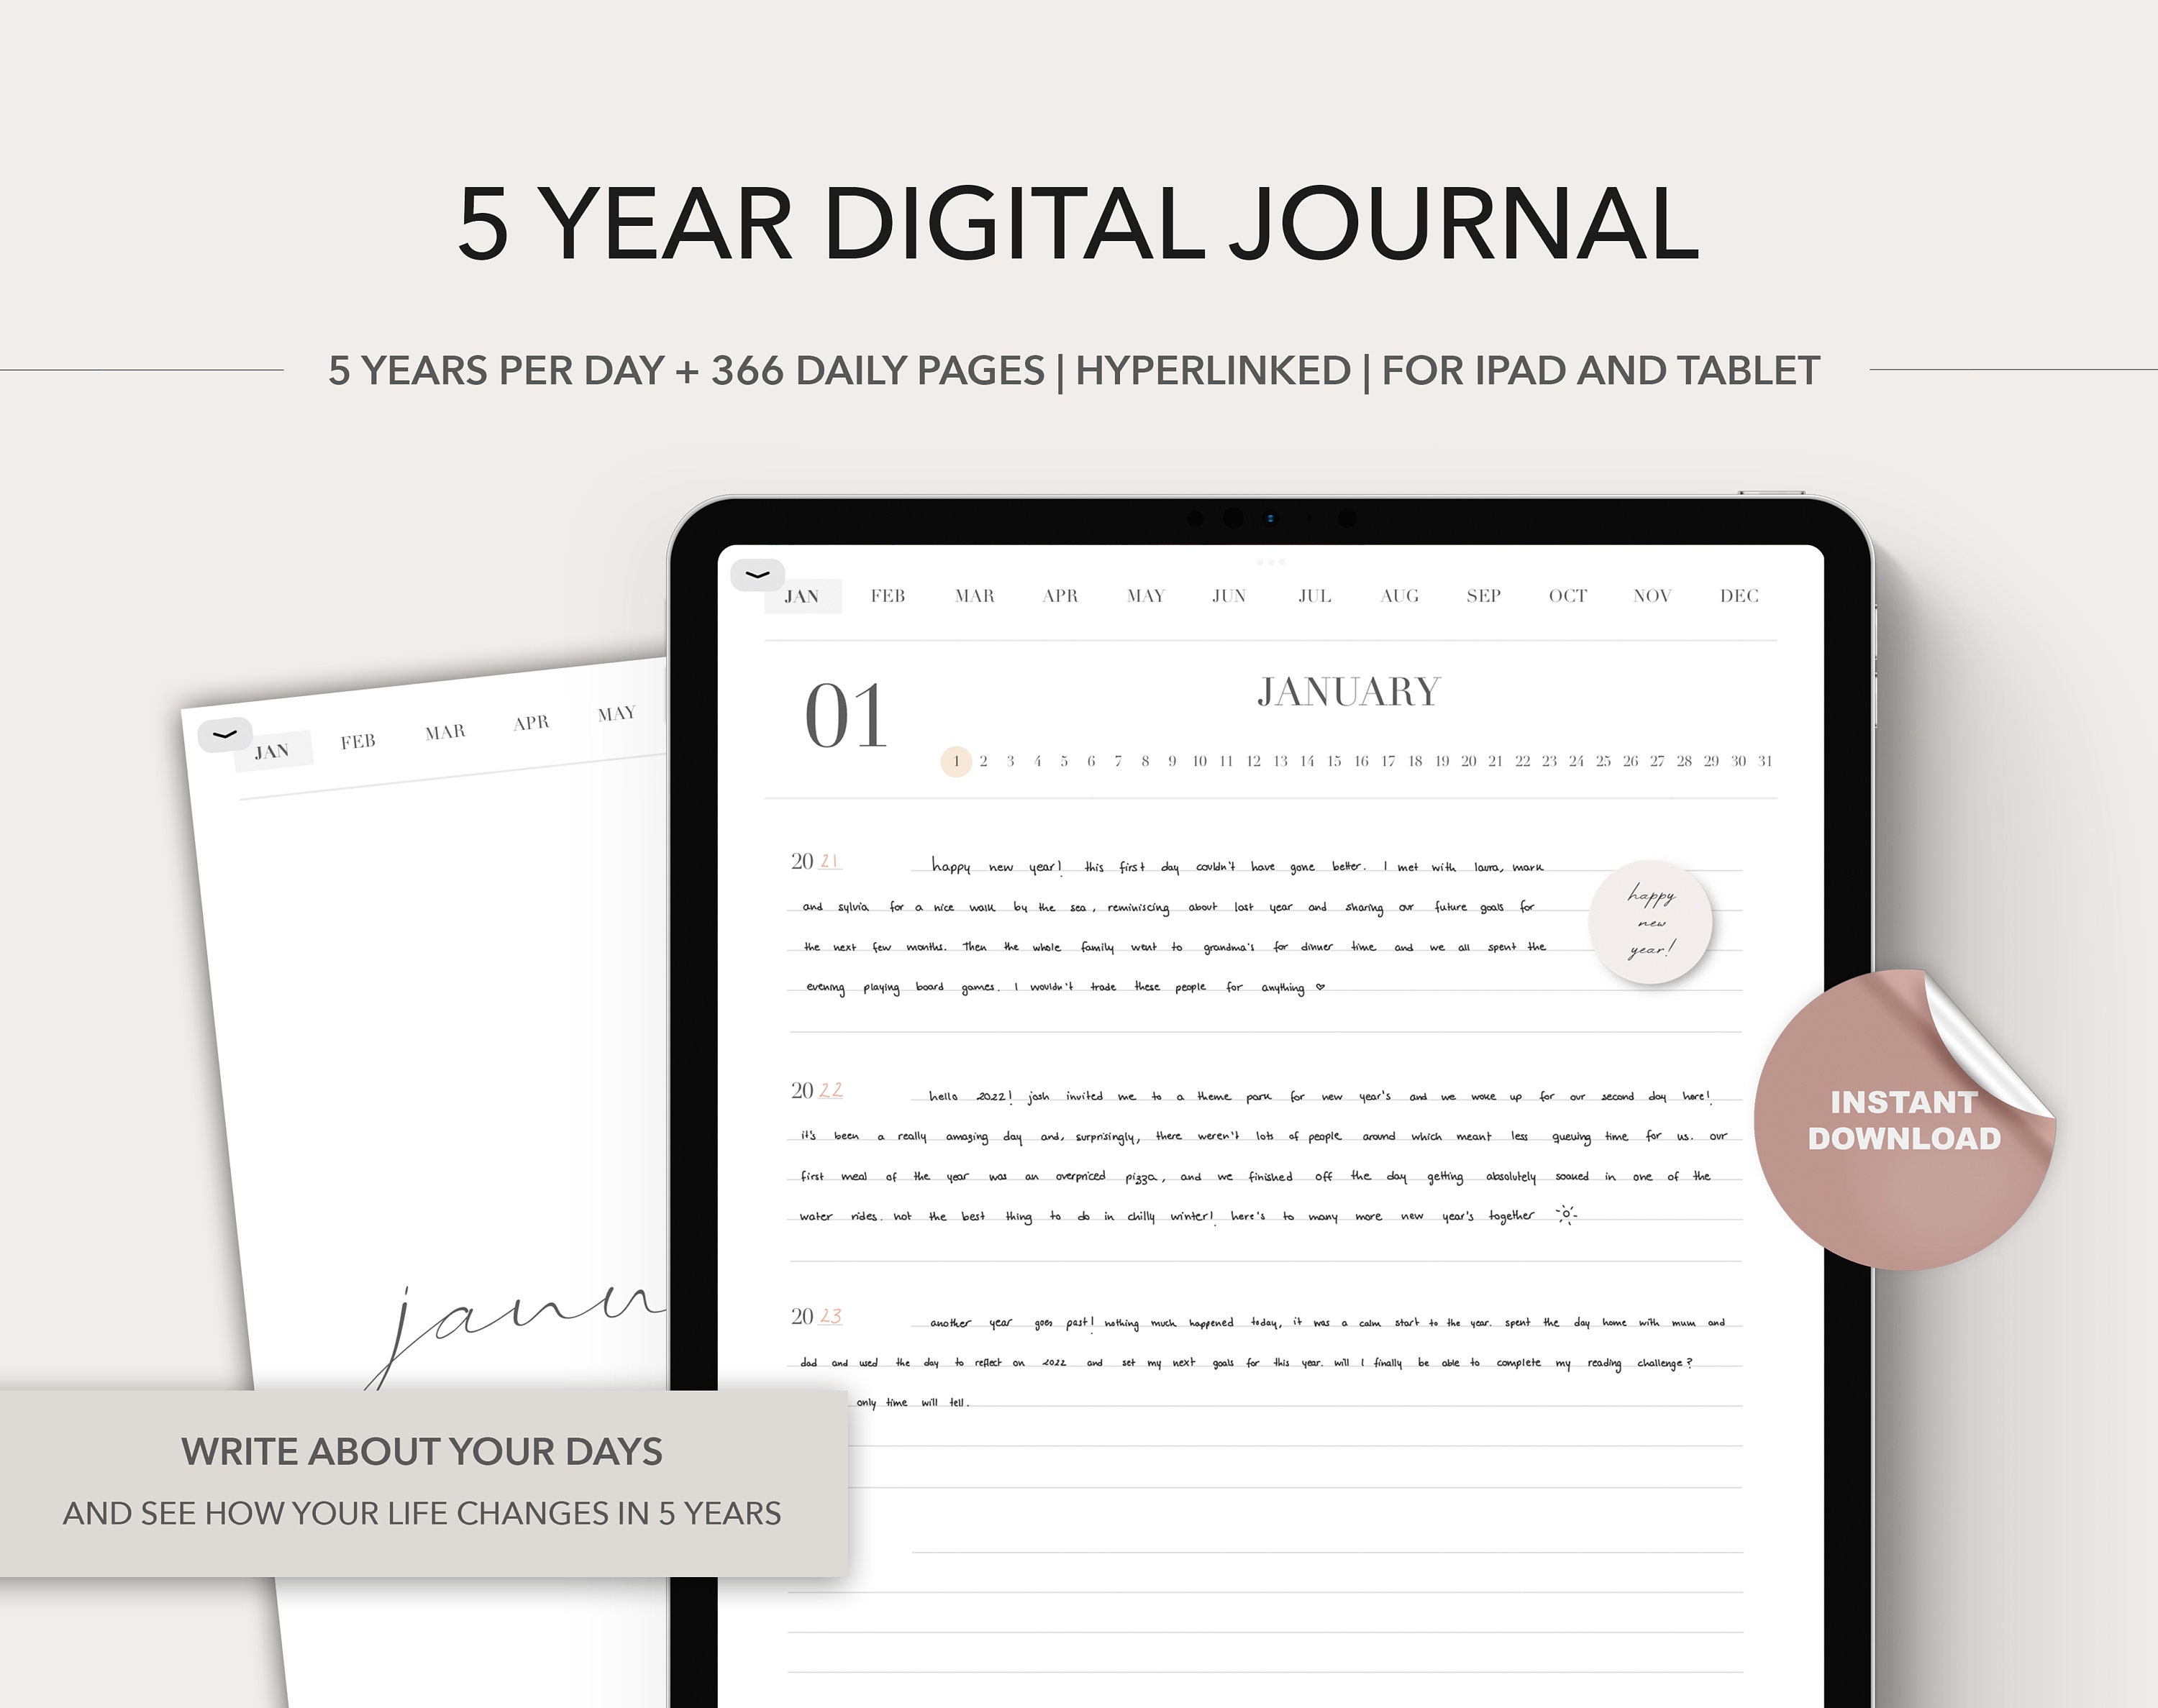 Digital One Line a Day Journal (5-Year) - GoodNotes Template